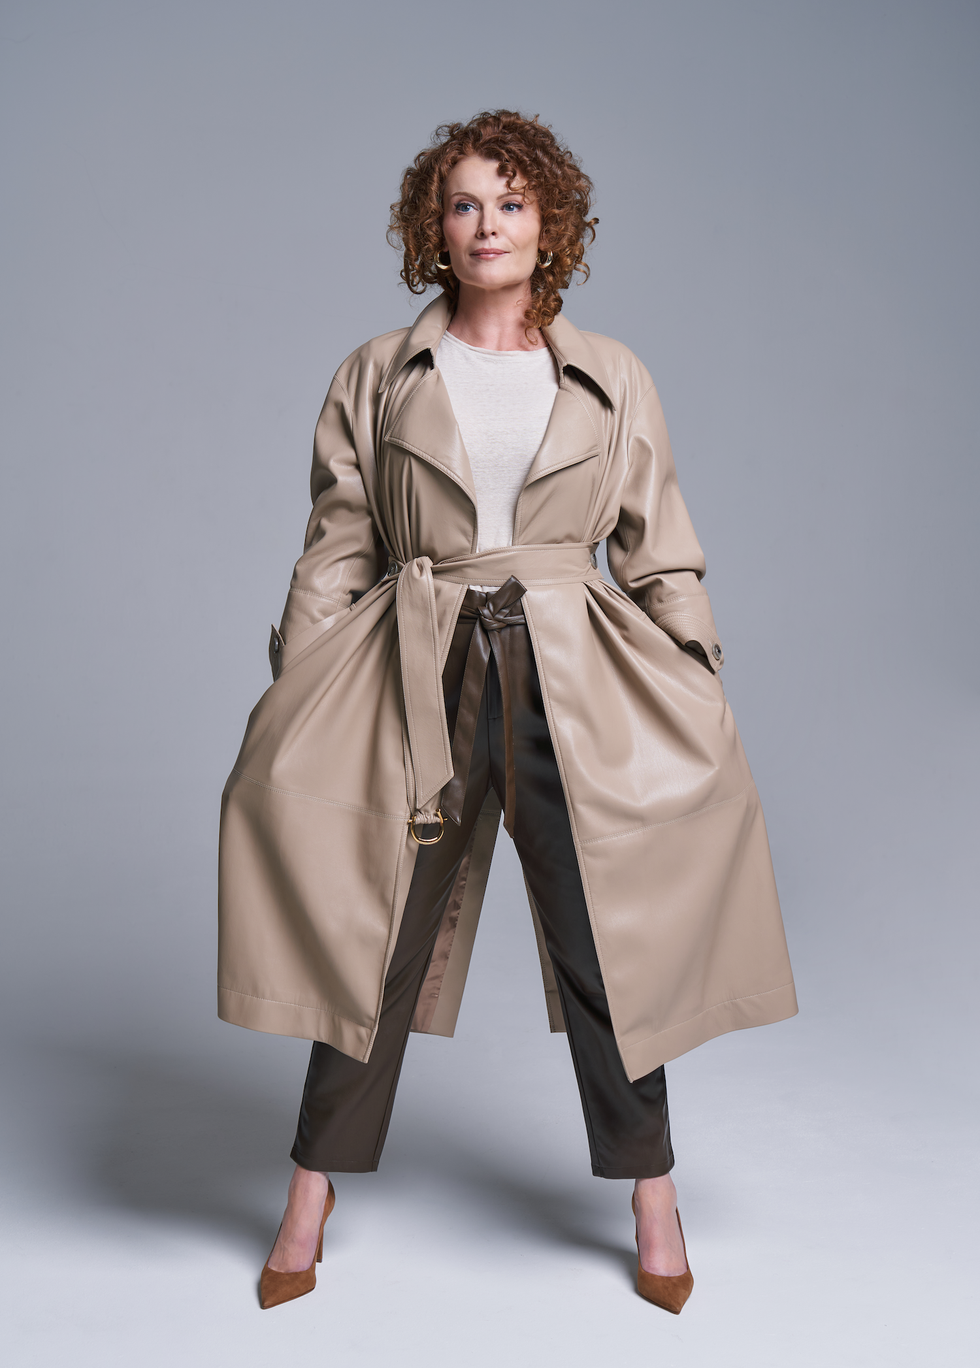 rebecca wisocky posing in a trench coat